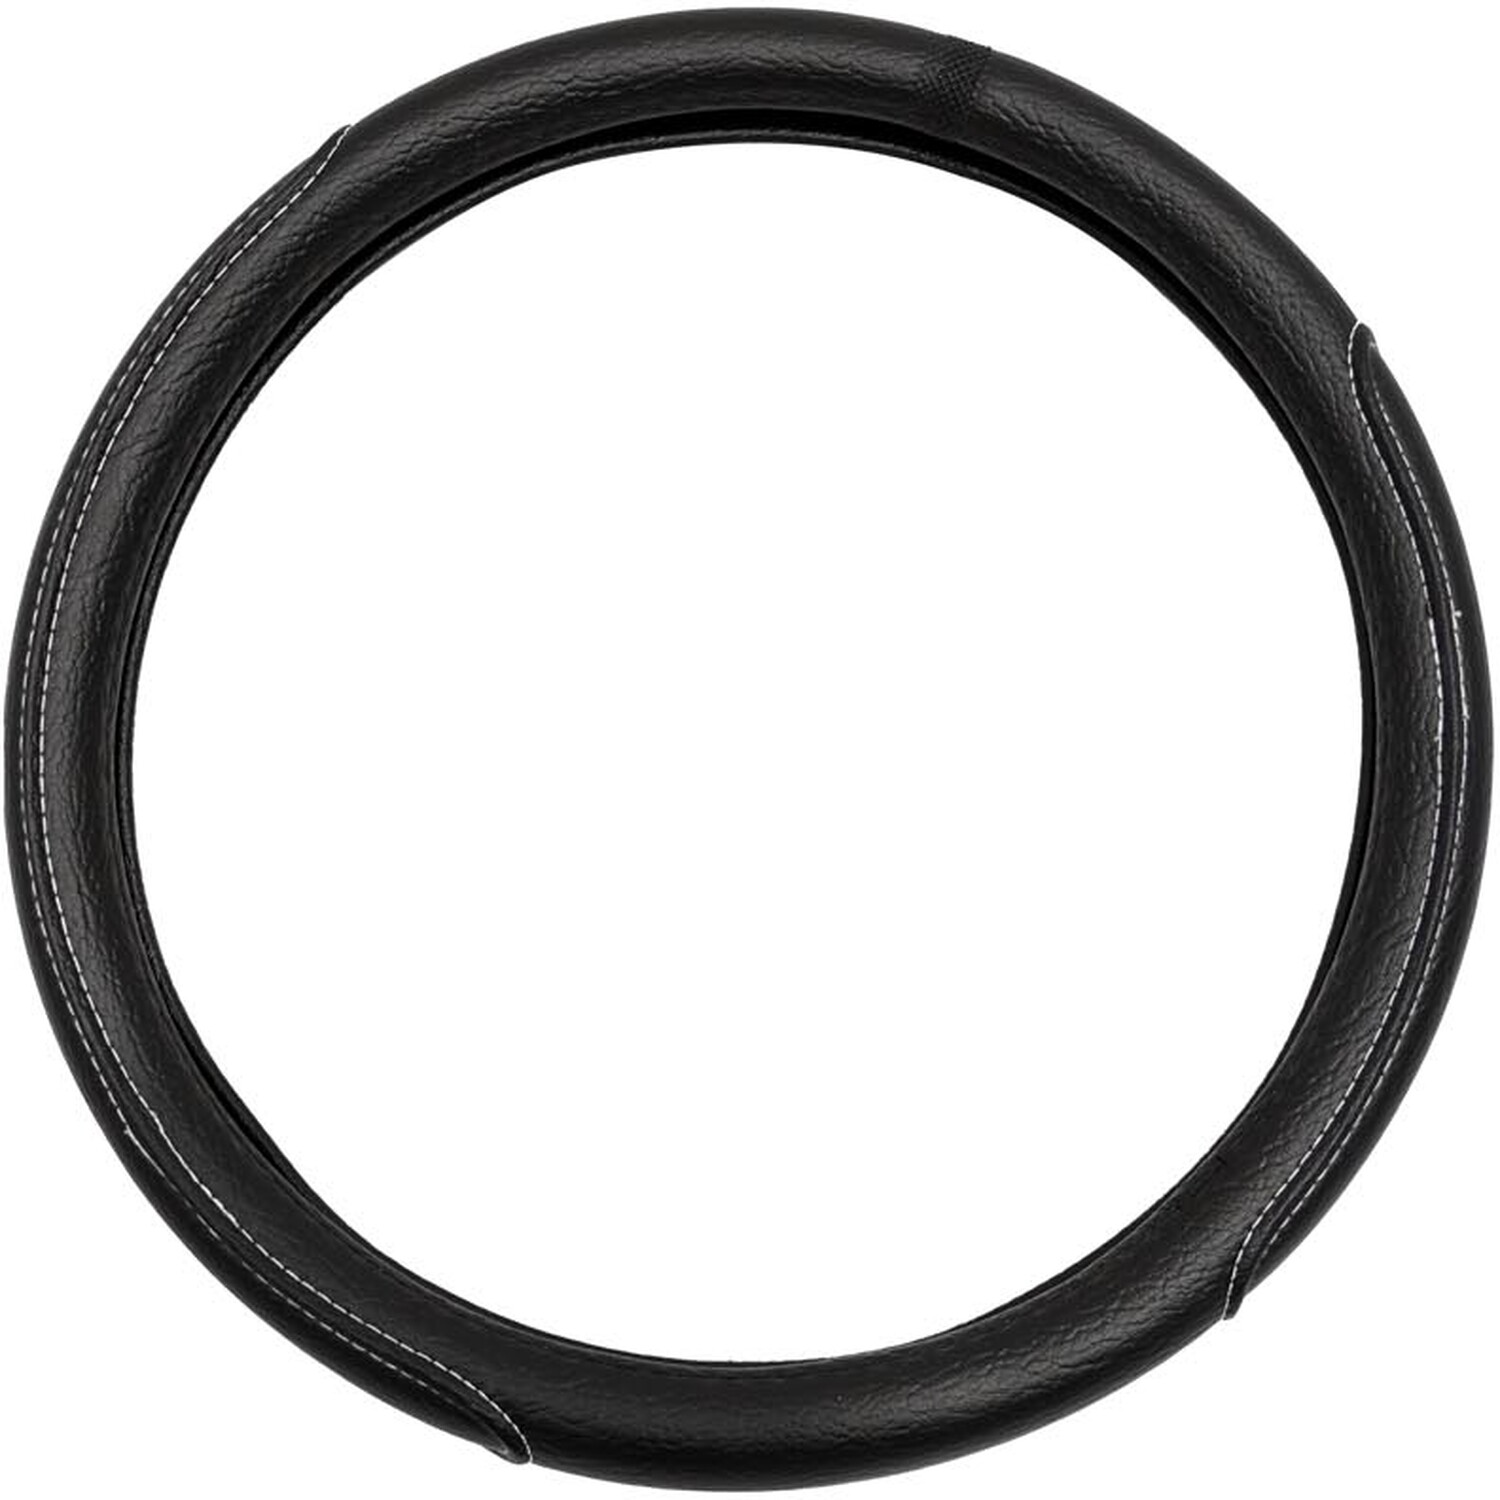 Carkit Steering Wheel Protective Cover - Black Image 4